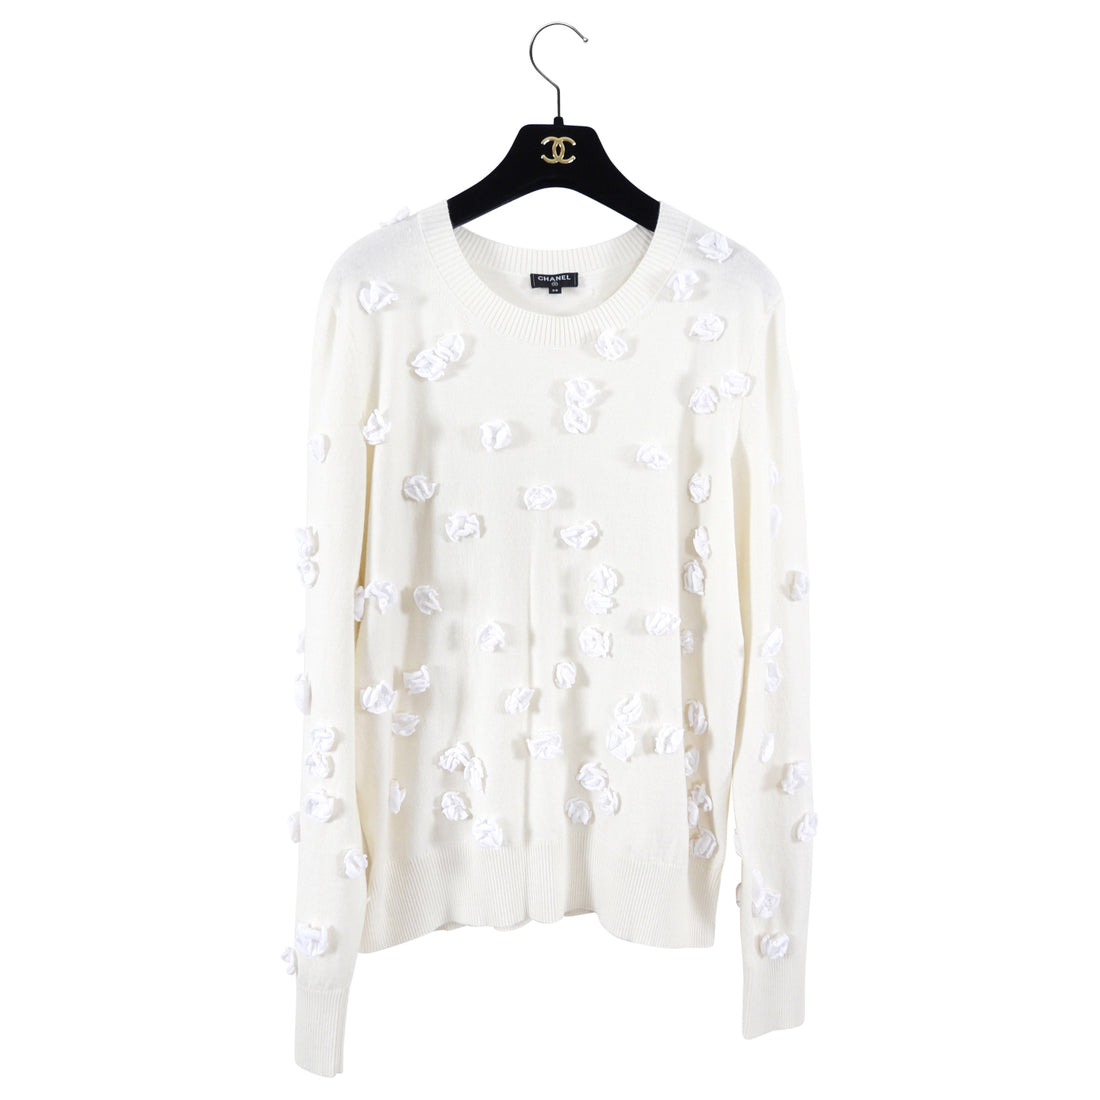 Chanel Ivory Cashmere Blend Pullover with Floral Applique - FR38 / M